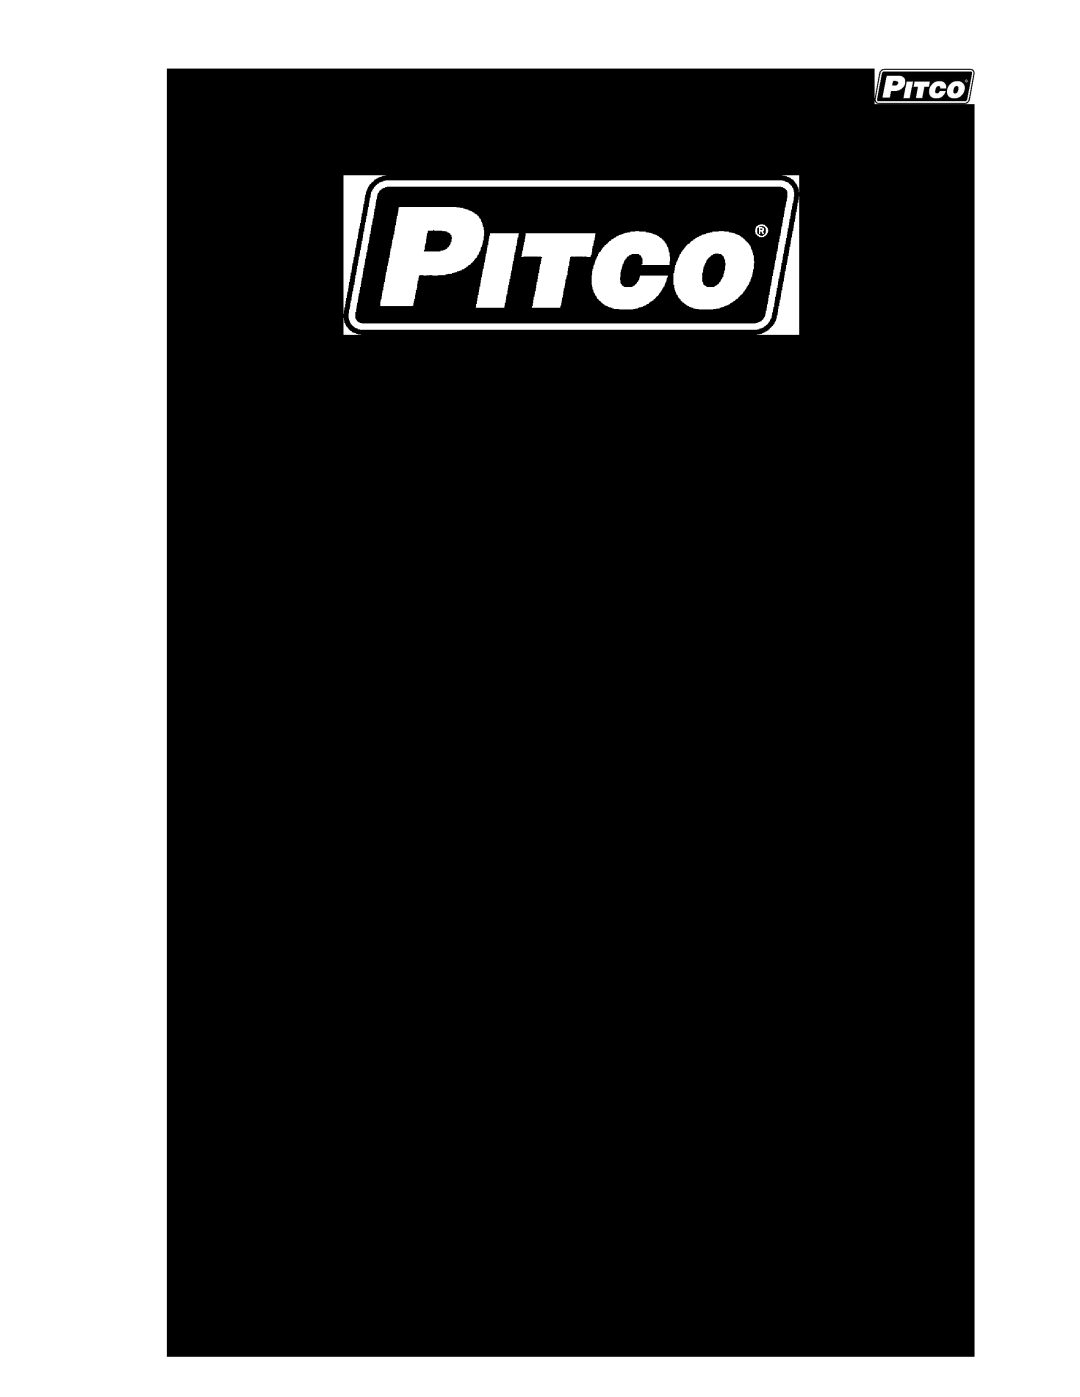 Pitco Frialator 60149518, 60149517 manual Solstice I12+ Cooking Computer for ROV Fryers Pitco P/N, L22-378 Rev, Page 44 of 